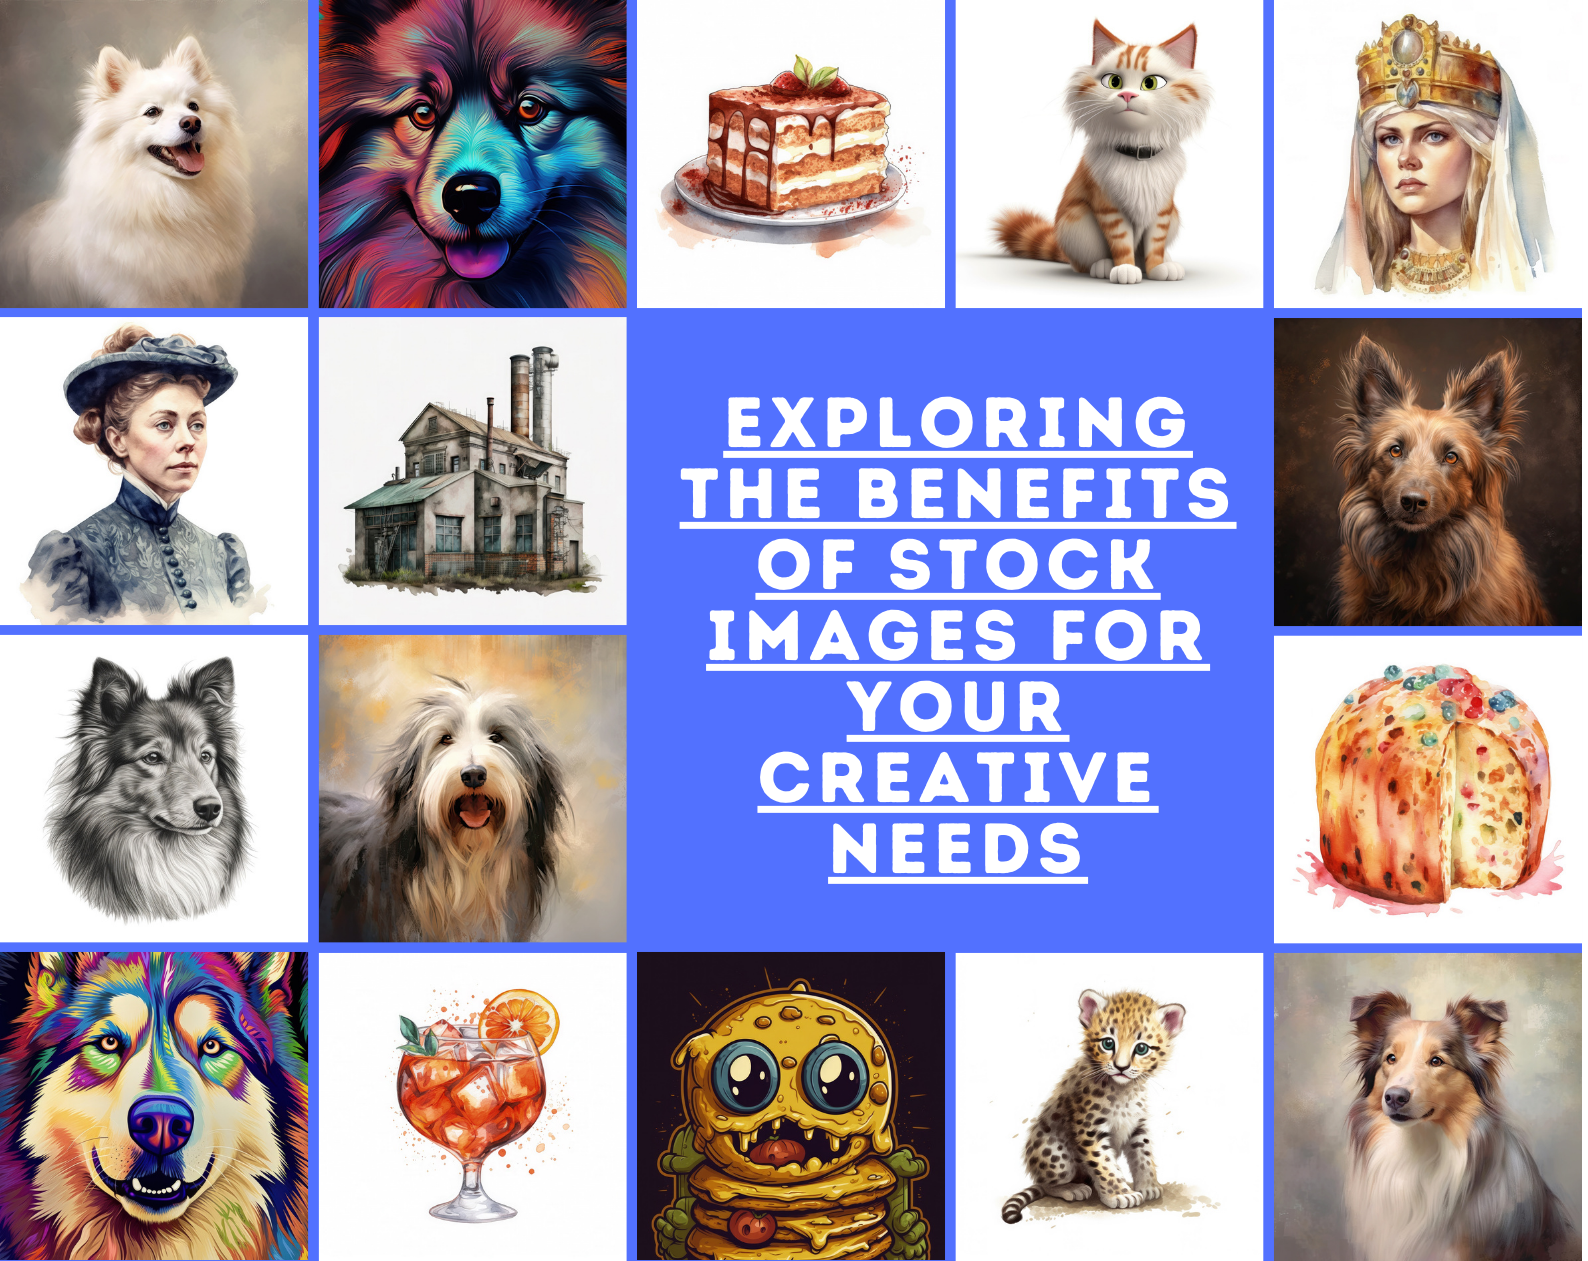 Exploring the Benefits of Stock Images for Your Creative Needs